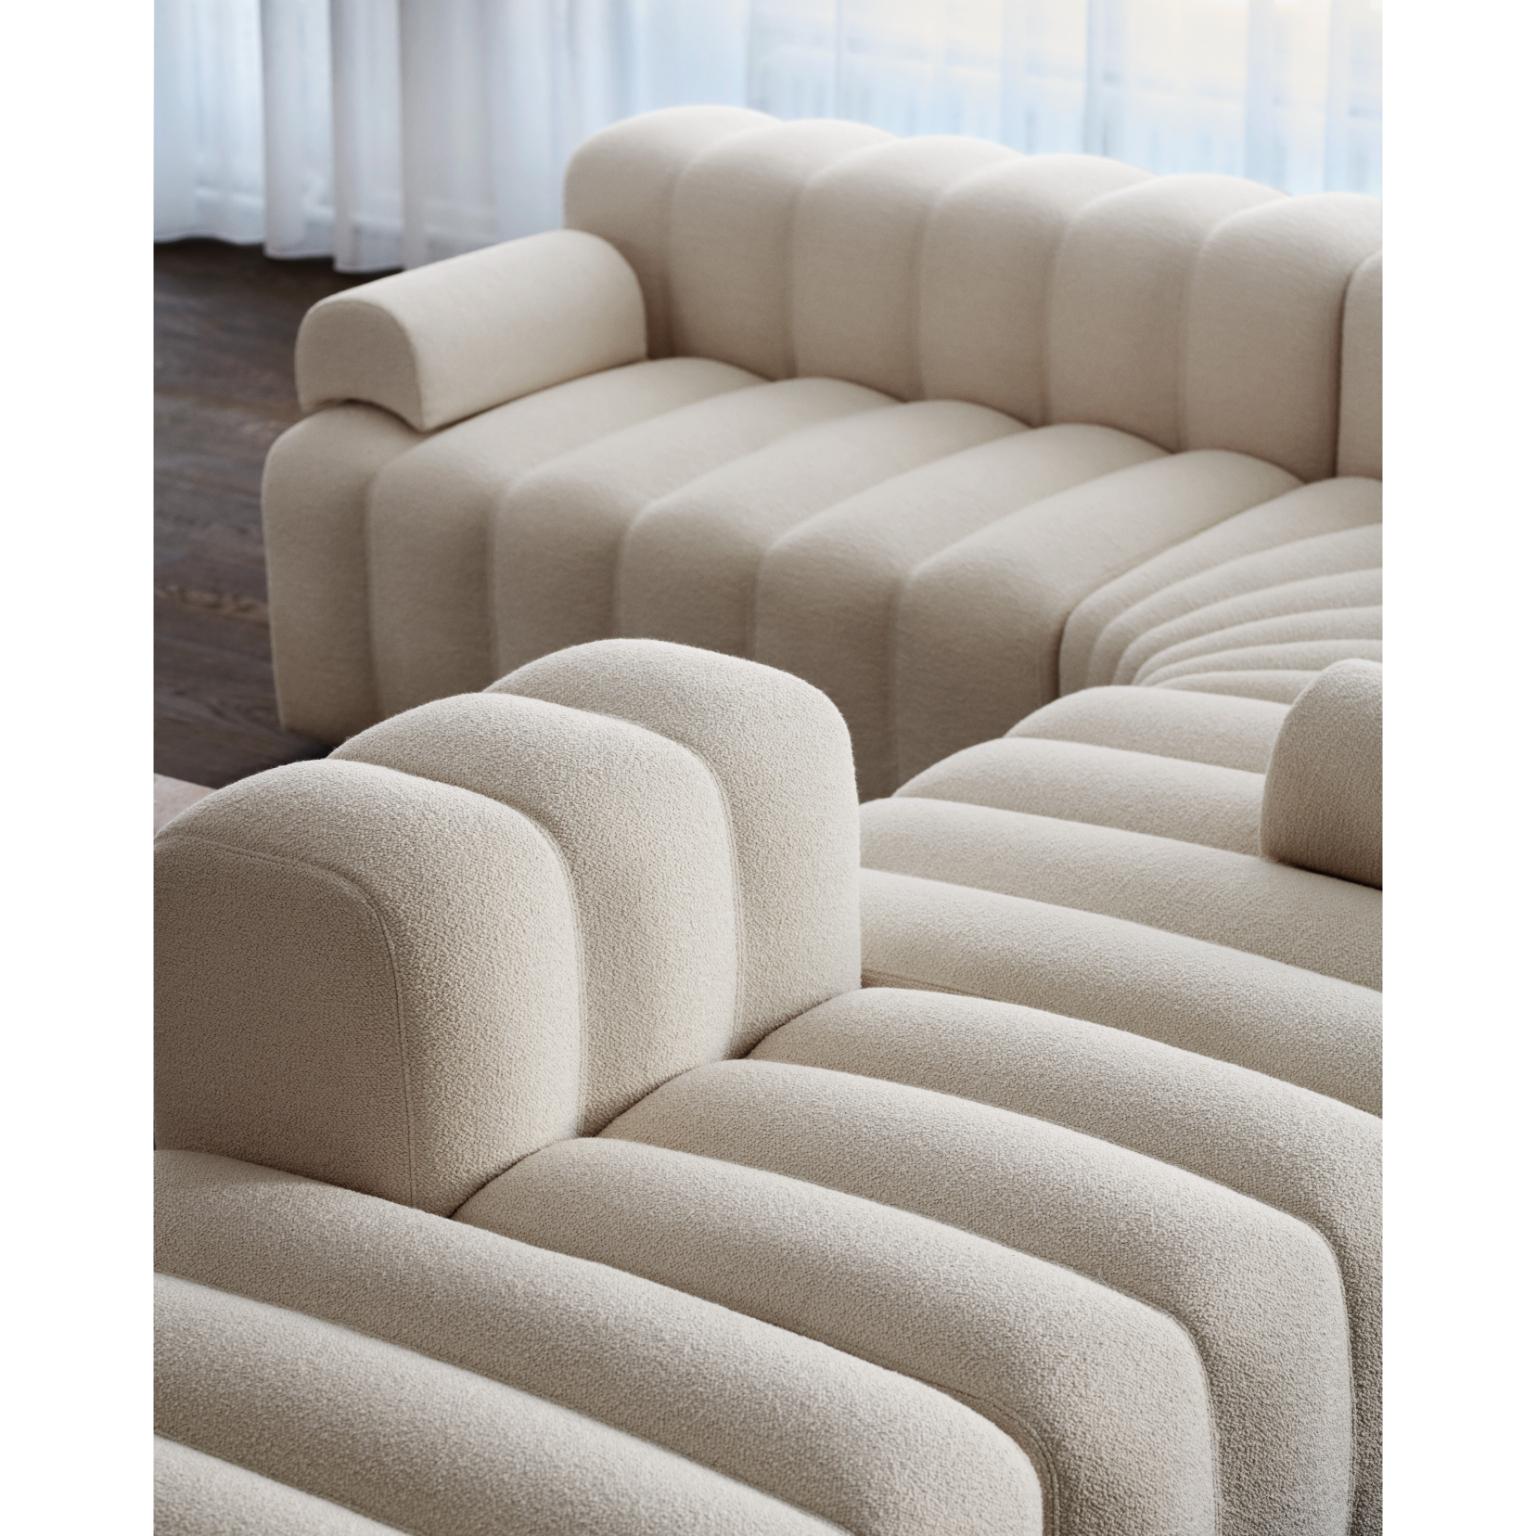 Studio Ottoman by NORR11
Dimensions: D 96 x W 80 x H 47 cm. SH 47 cm. 
Materials: Foam, wood and upholstery.
Upholstery: Barnum Boucle Color 3.
Weight: 25 kg.

Available in different upholstery options. A plywood structure with elastic belts & foam.